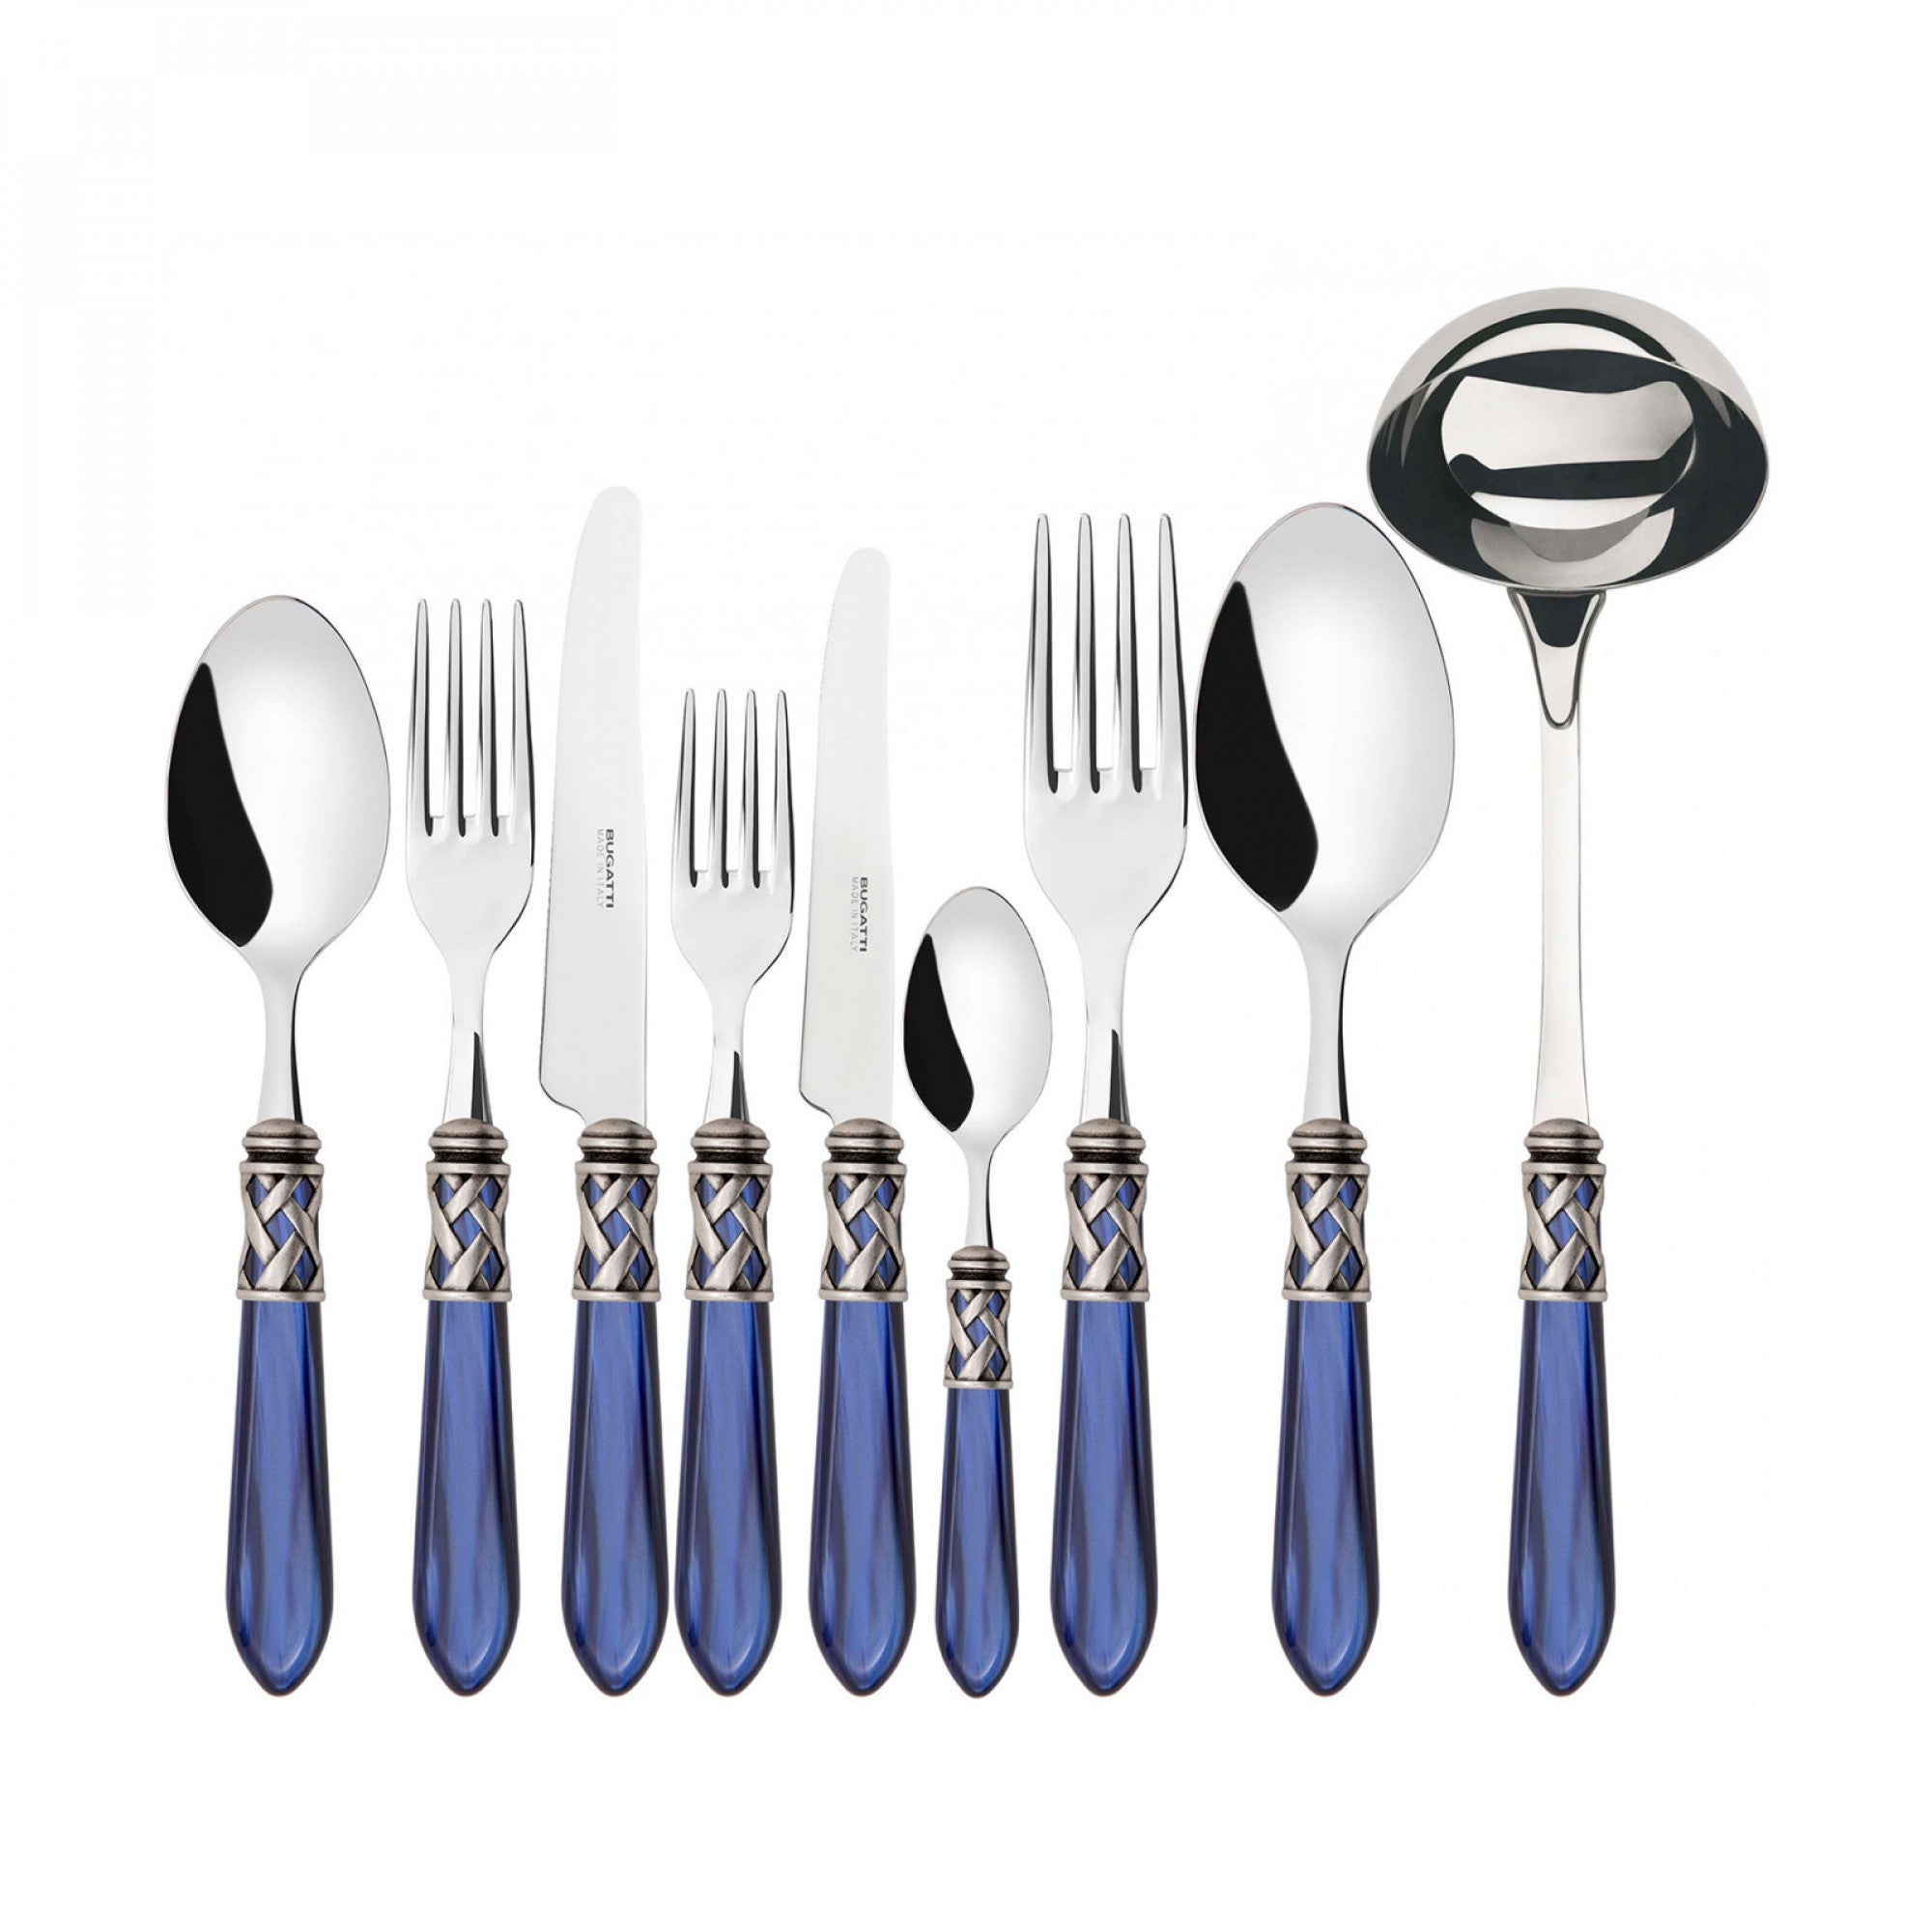 BUGATTI, Aladdin, 75-piece cutlery set in 18/10 stainless steel, silver ring and mother-of-pearl effect handle, packaged in a wengè box